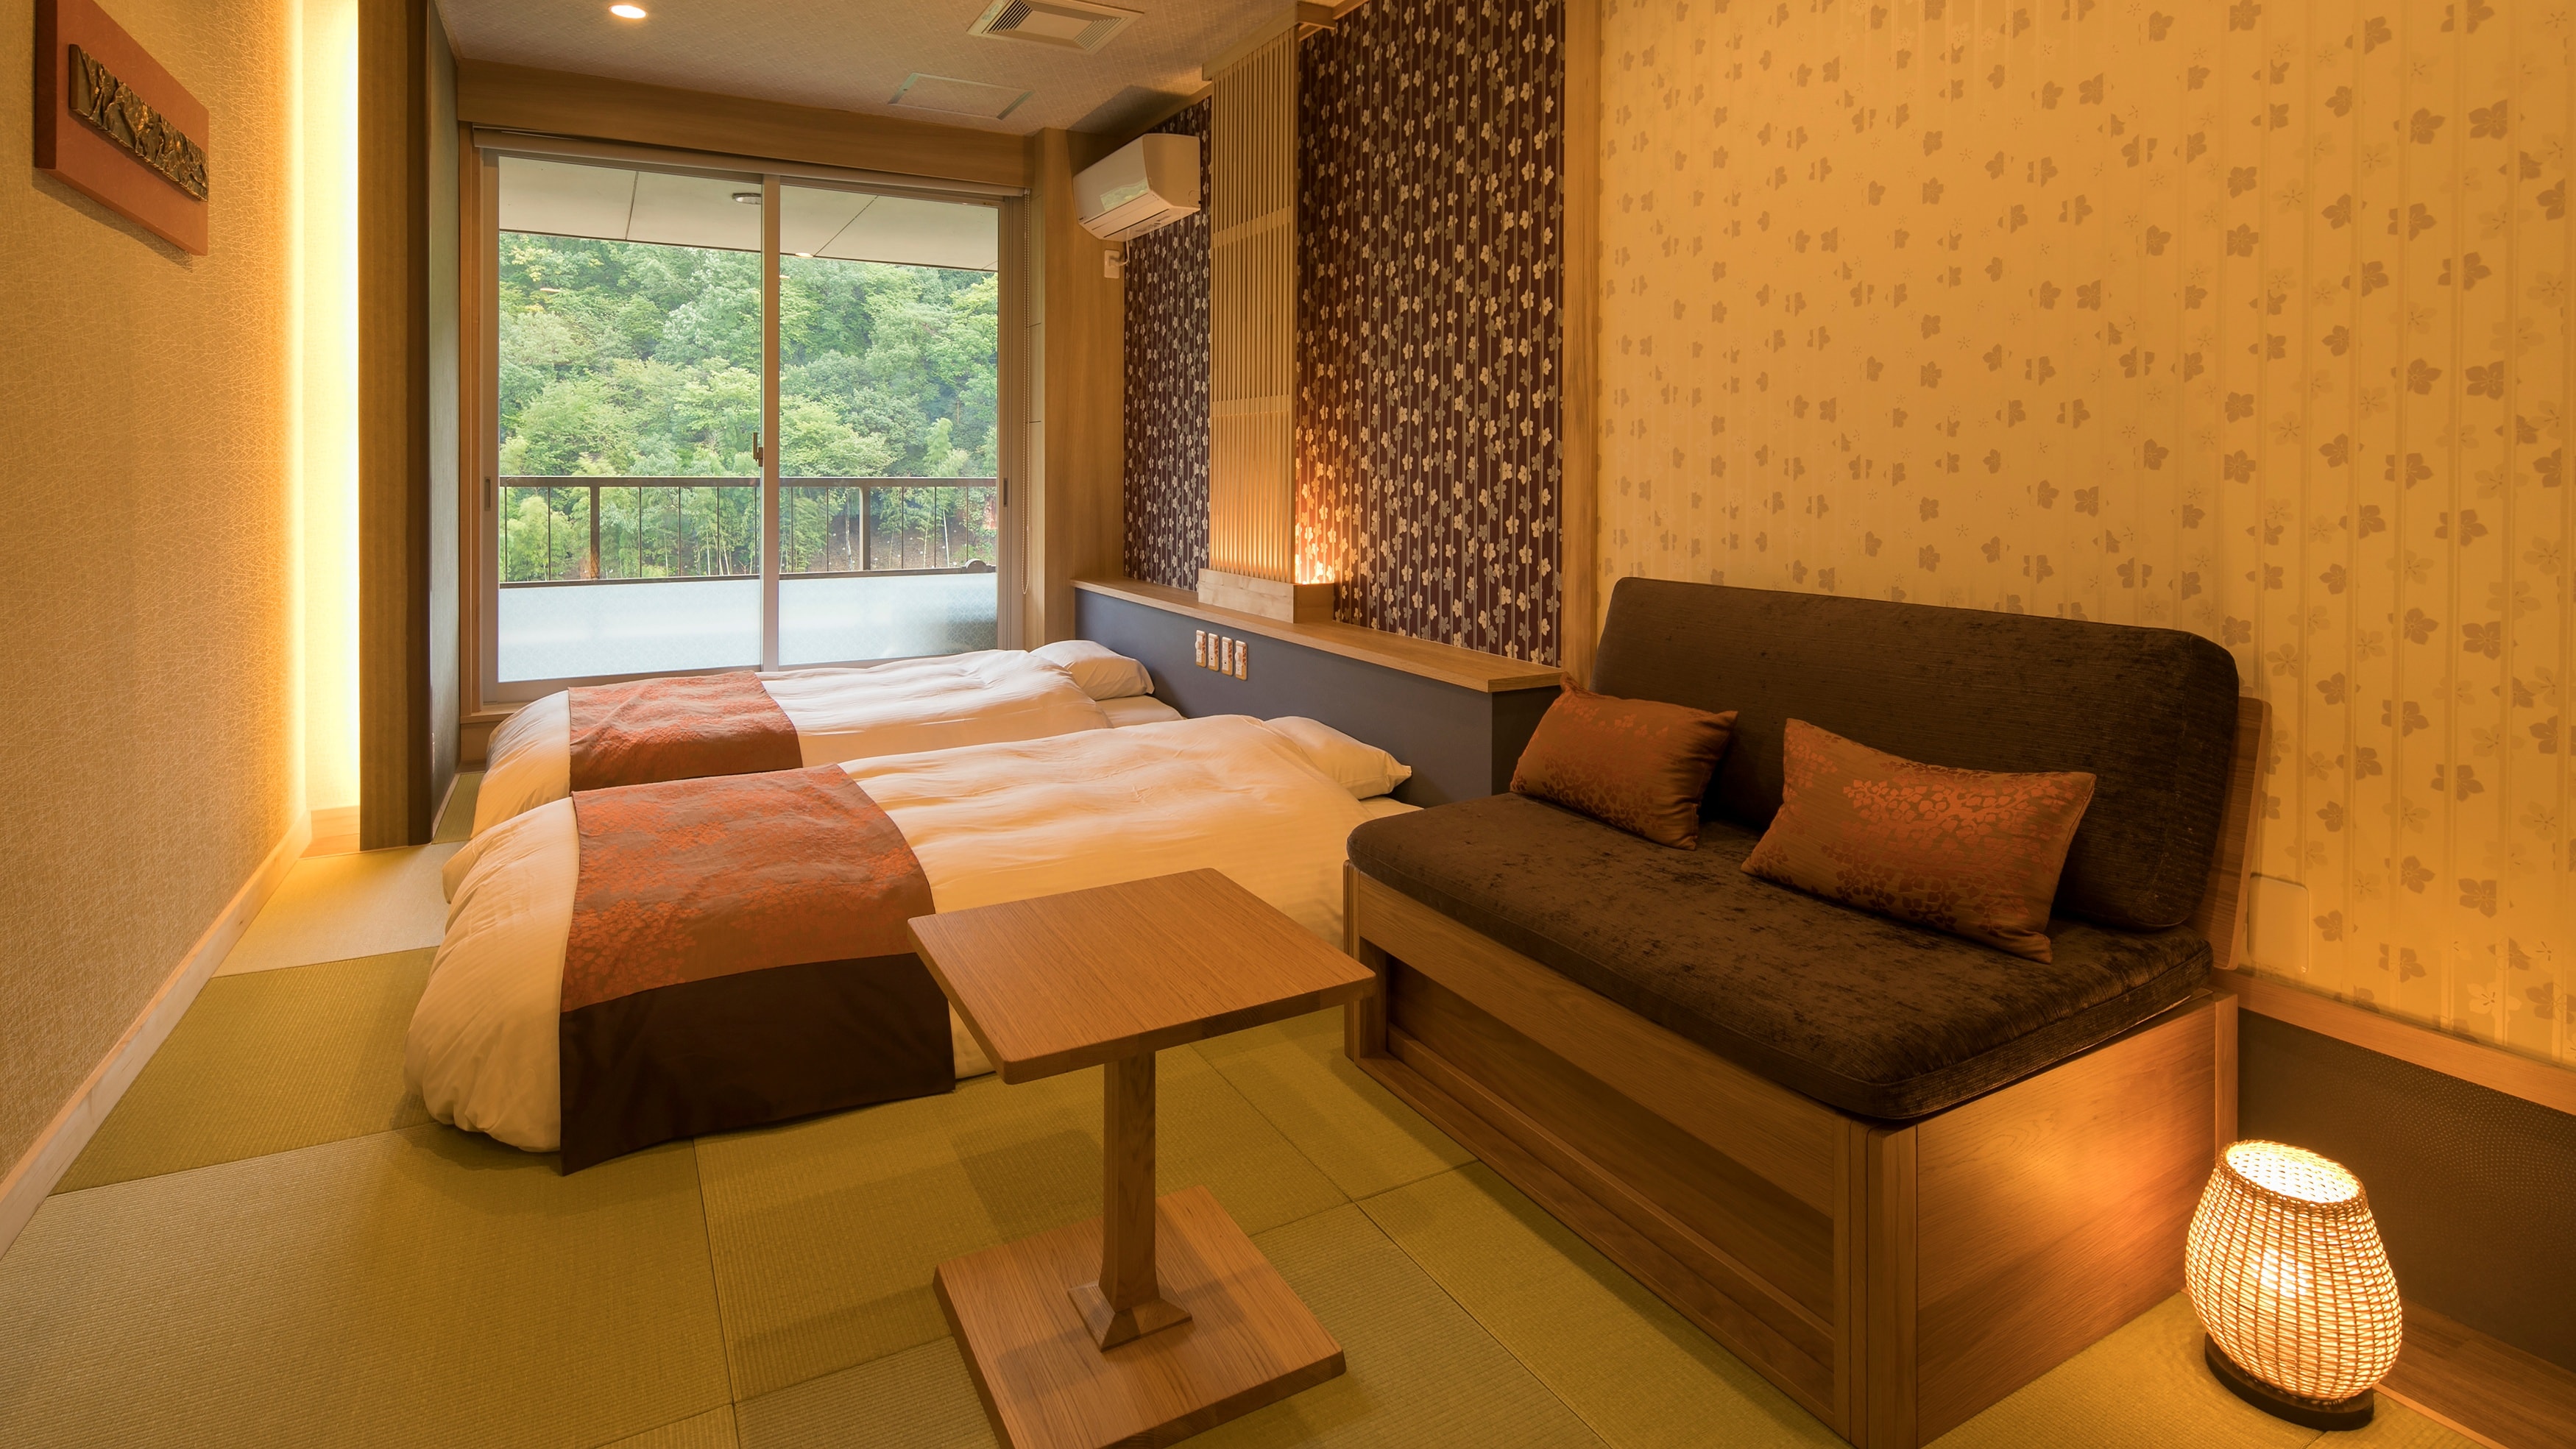 [Japanese-style twin room] A room with a low bed. When using for 3 people, the sofa in the foreground will be converted into a bed.